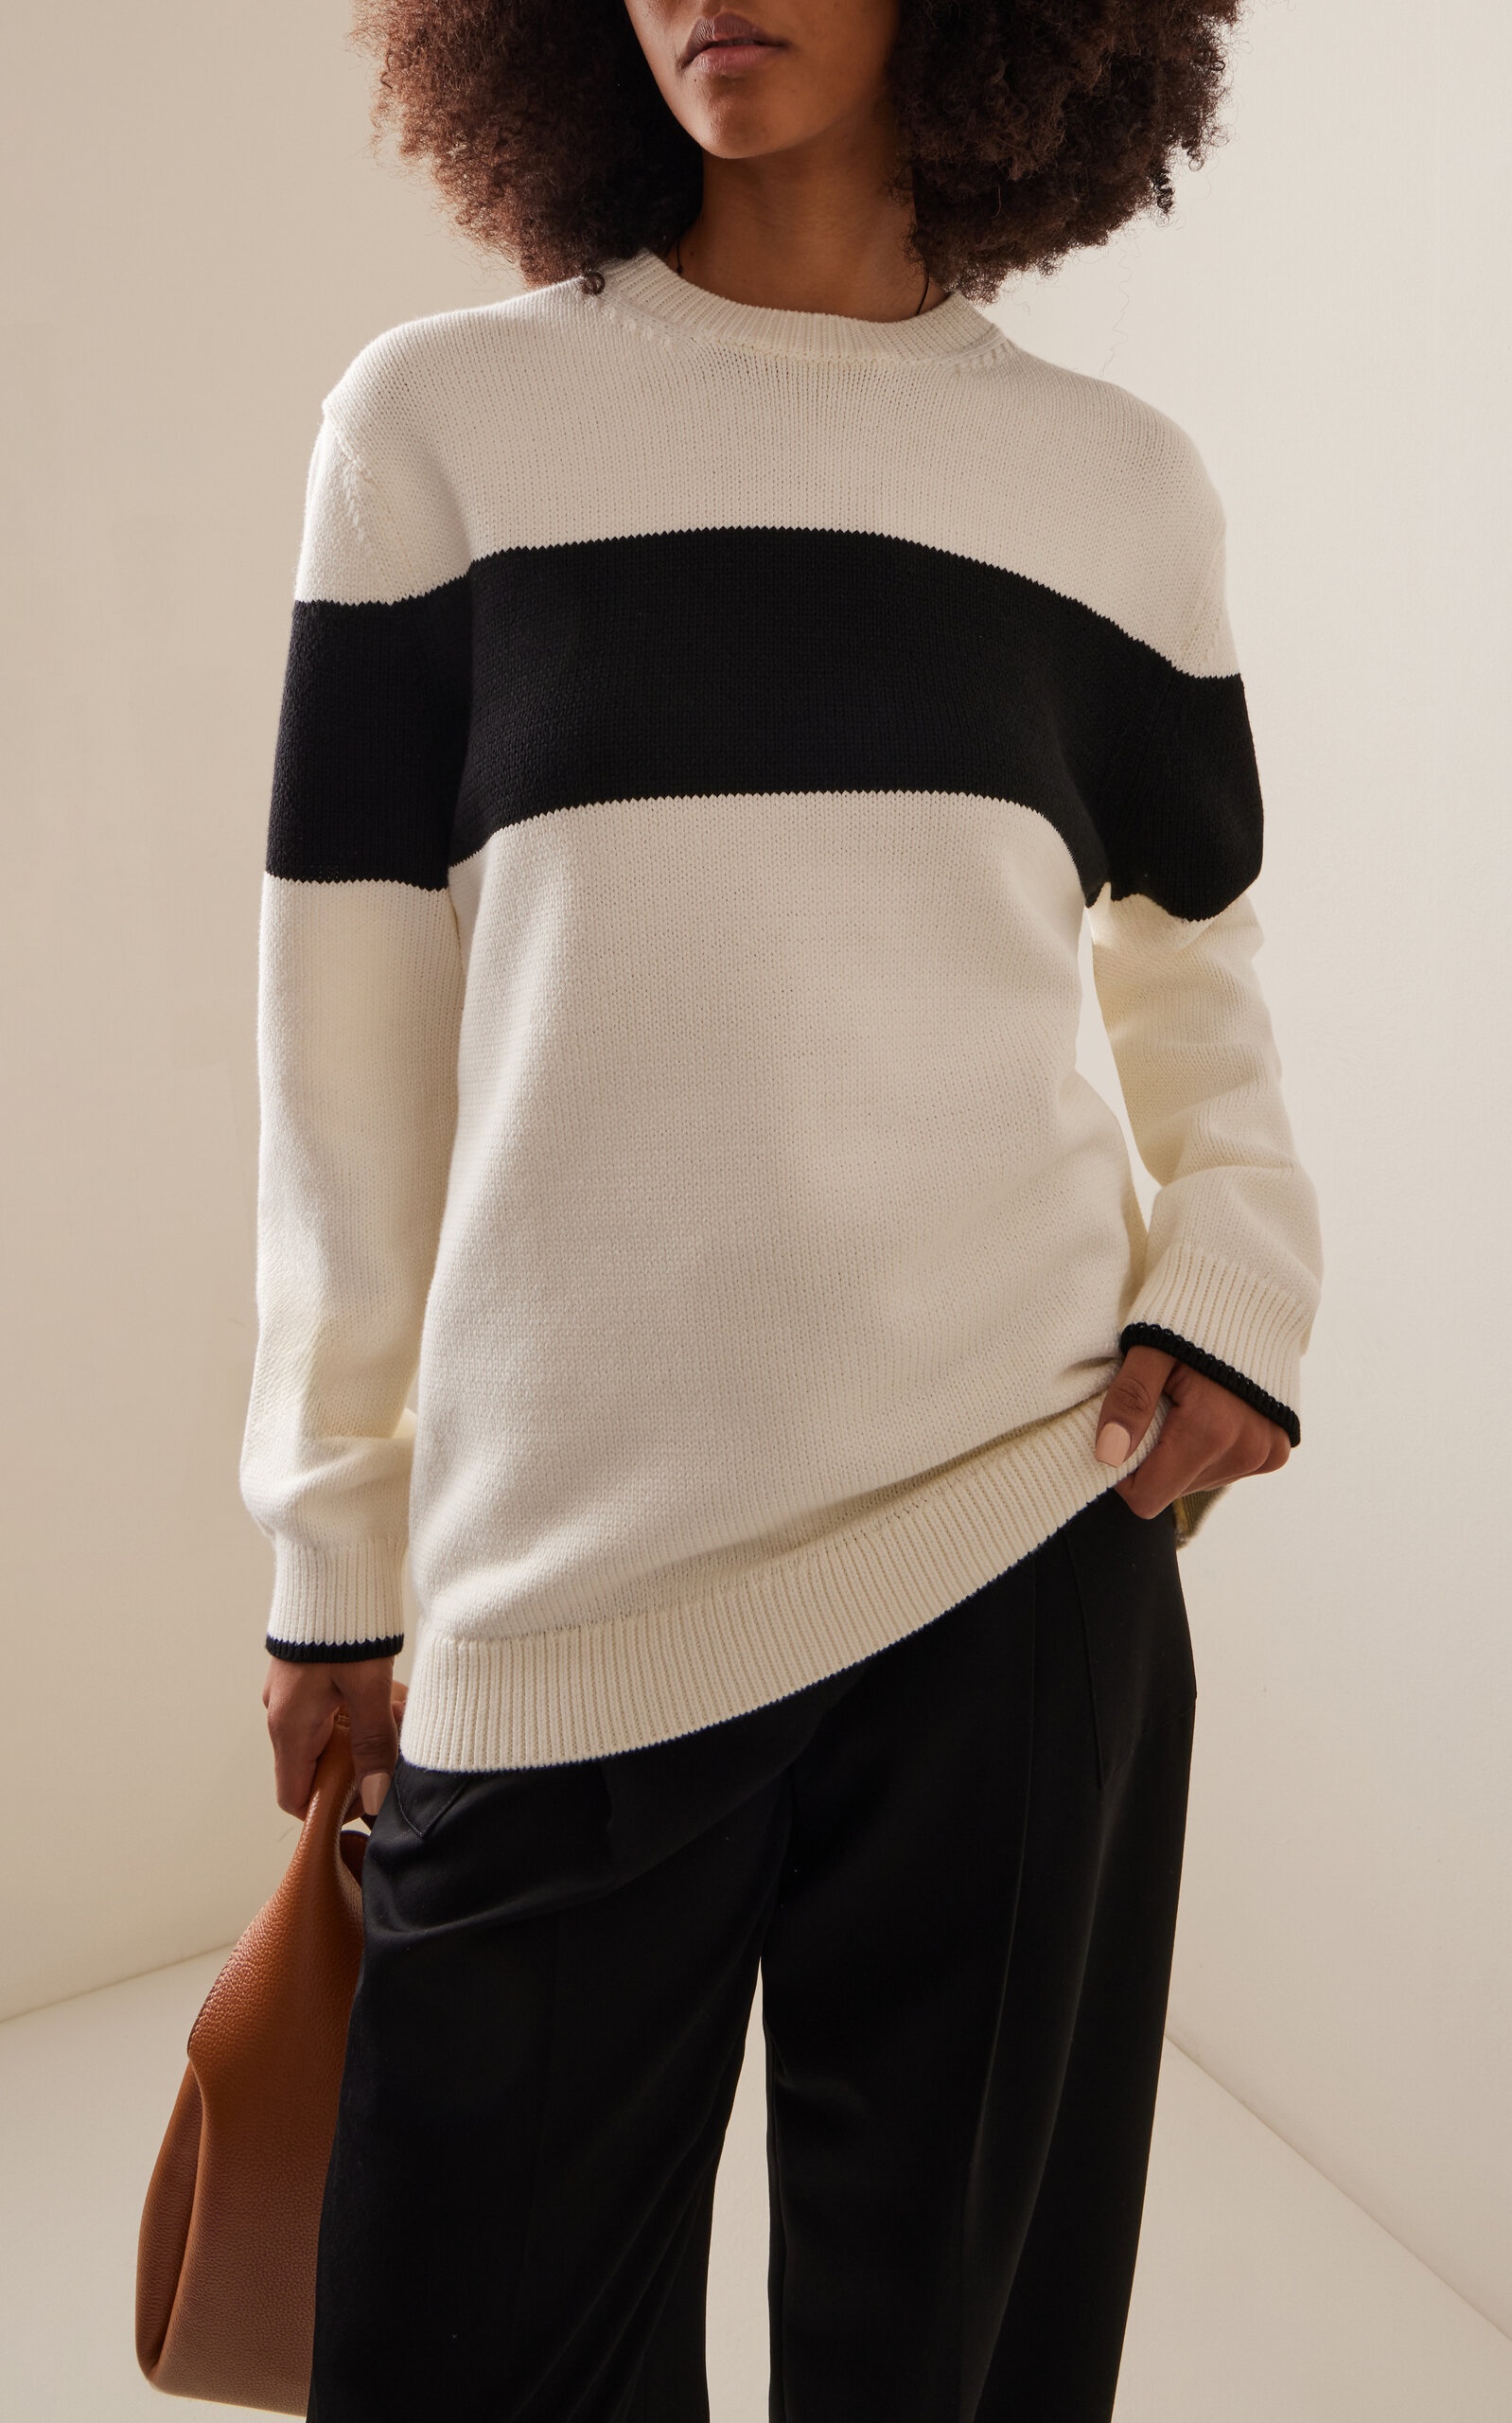 Contrast-Striped Knit Sweater black/white - 3